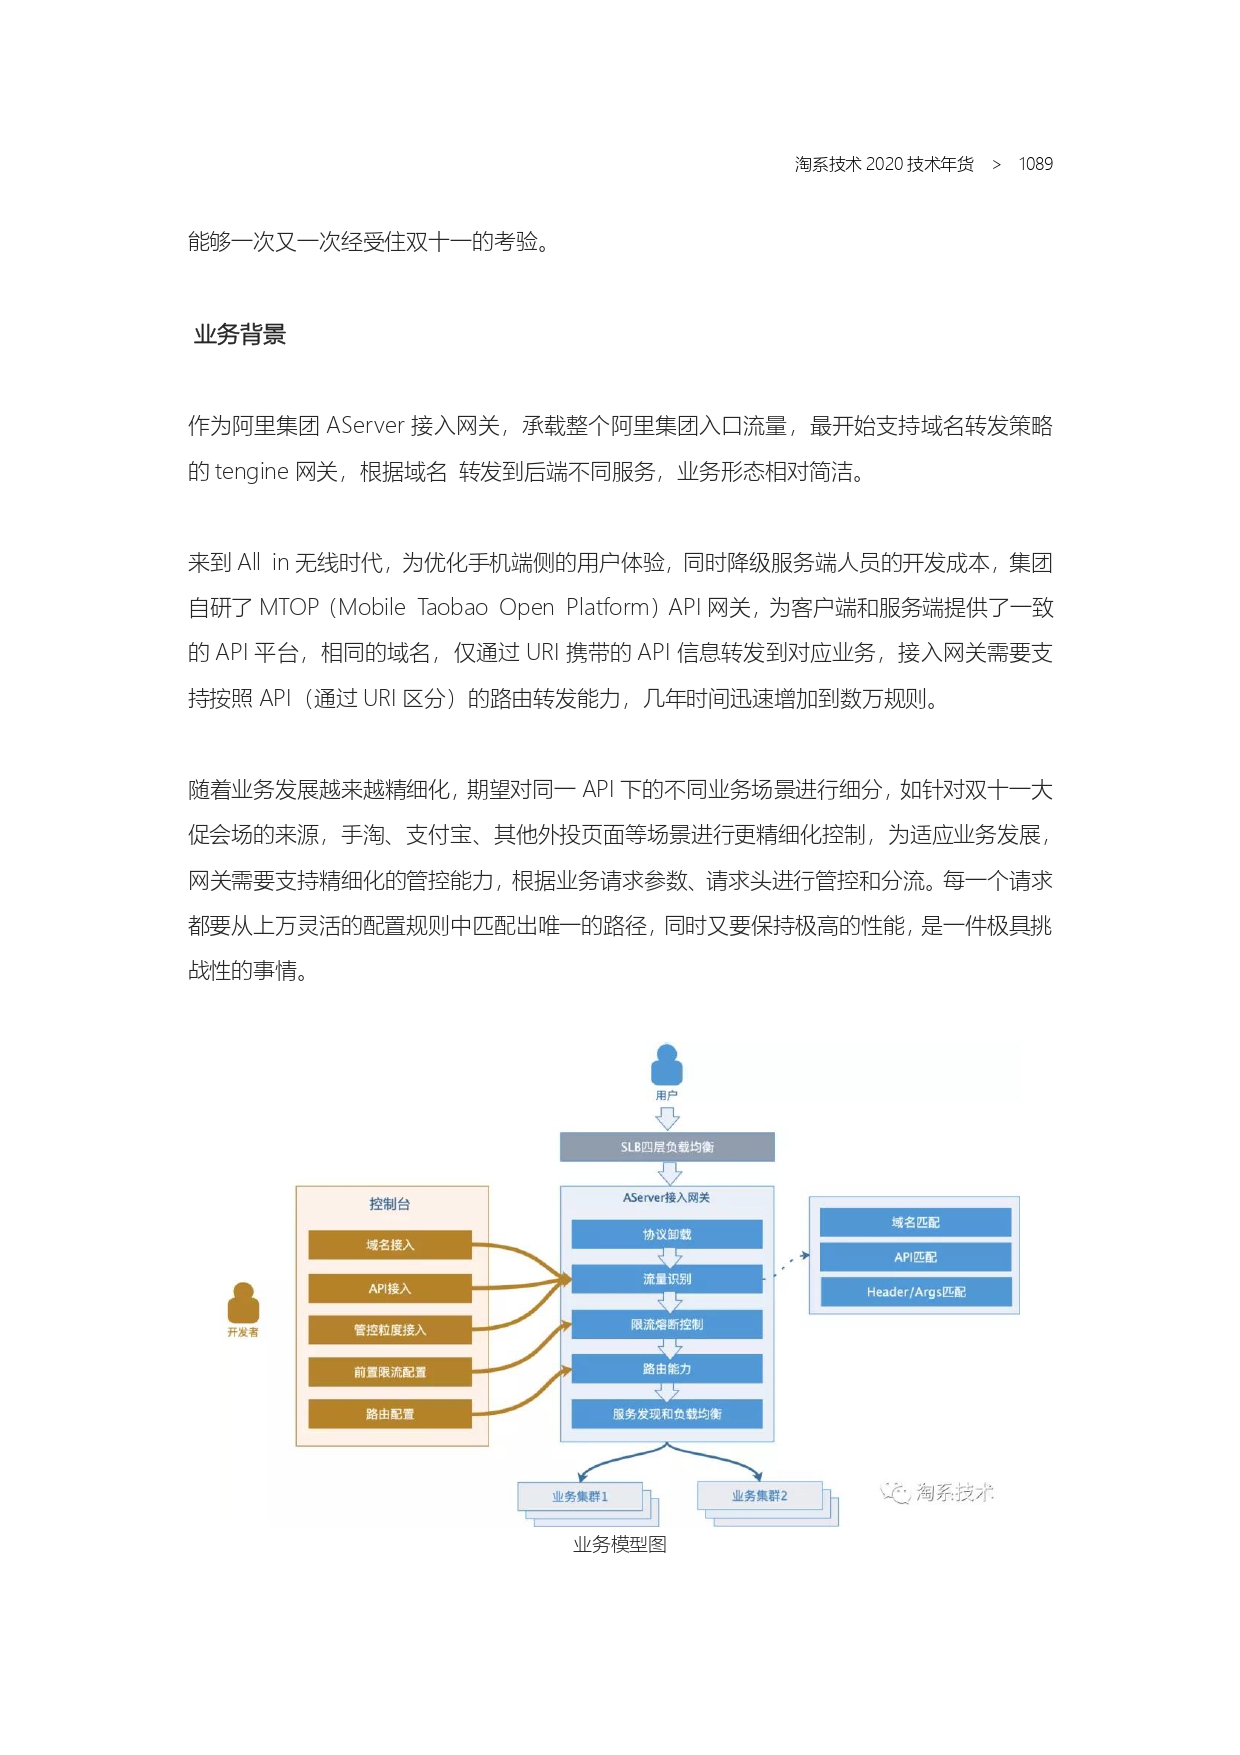 The Complete Works of Tao Technology 2020-571-1189-301-619_page-0219.jpg